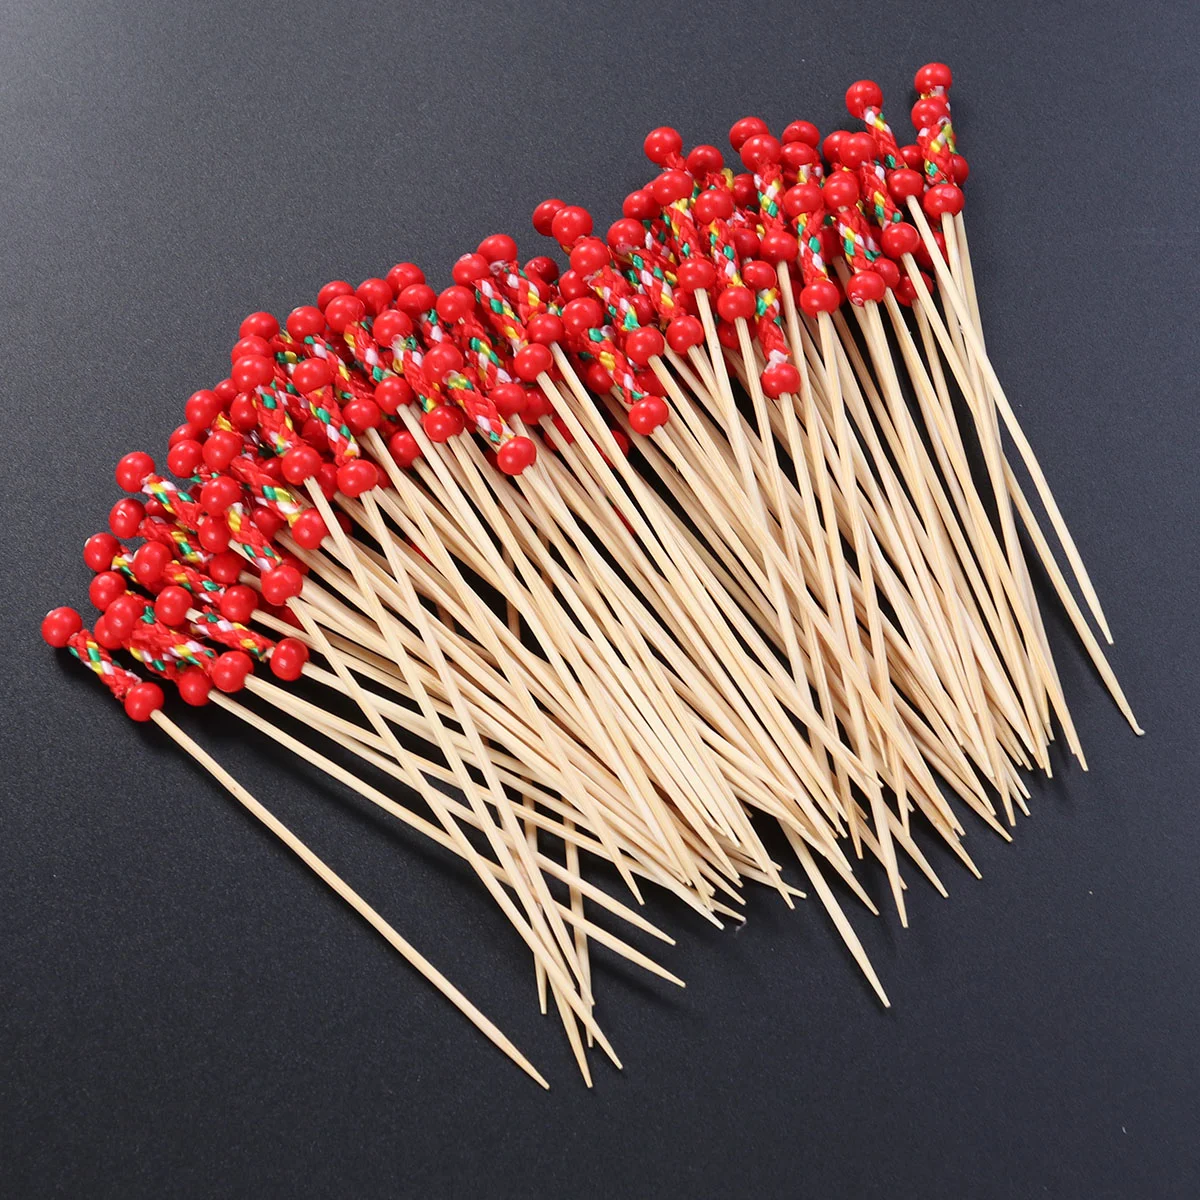 

Nuobesty Wooden Beaded Cocktail Picks Vintage Fruit Toothpicks Disposable Sandwich Party Supplies Skewers Wedding Birthday